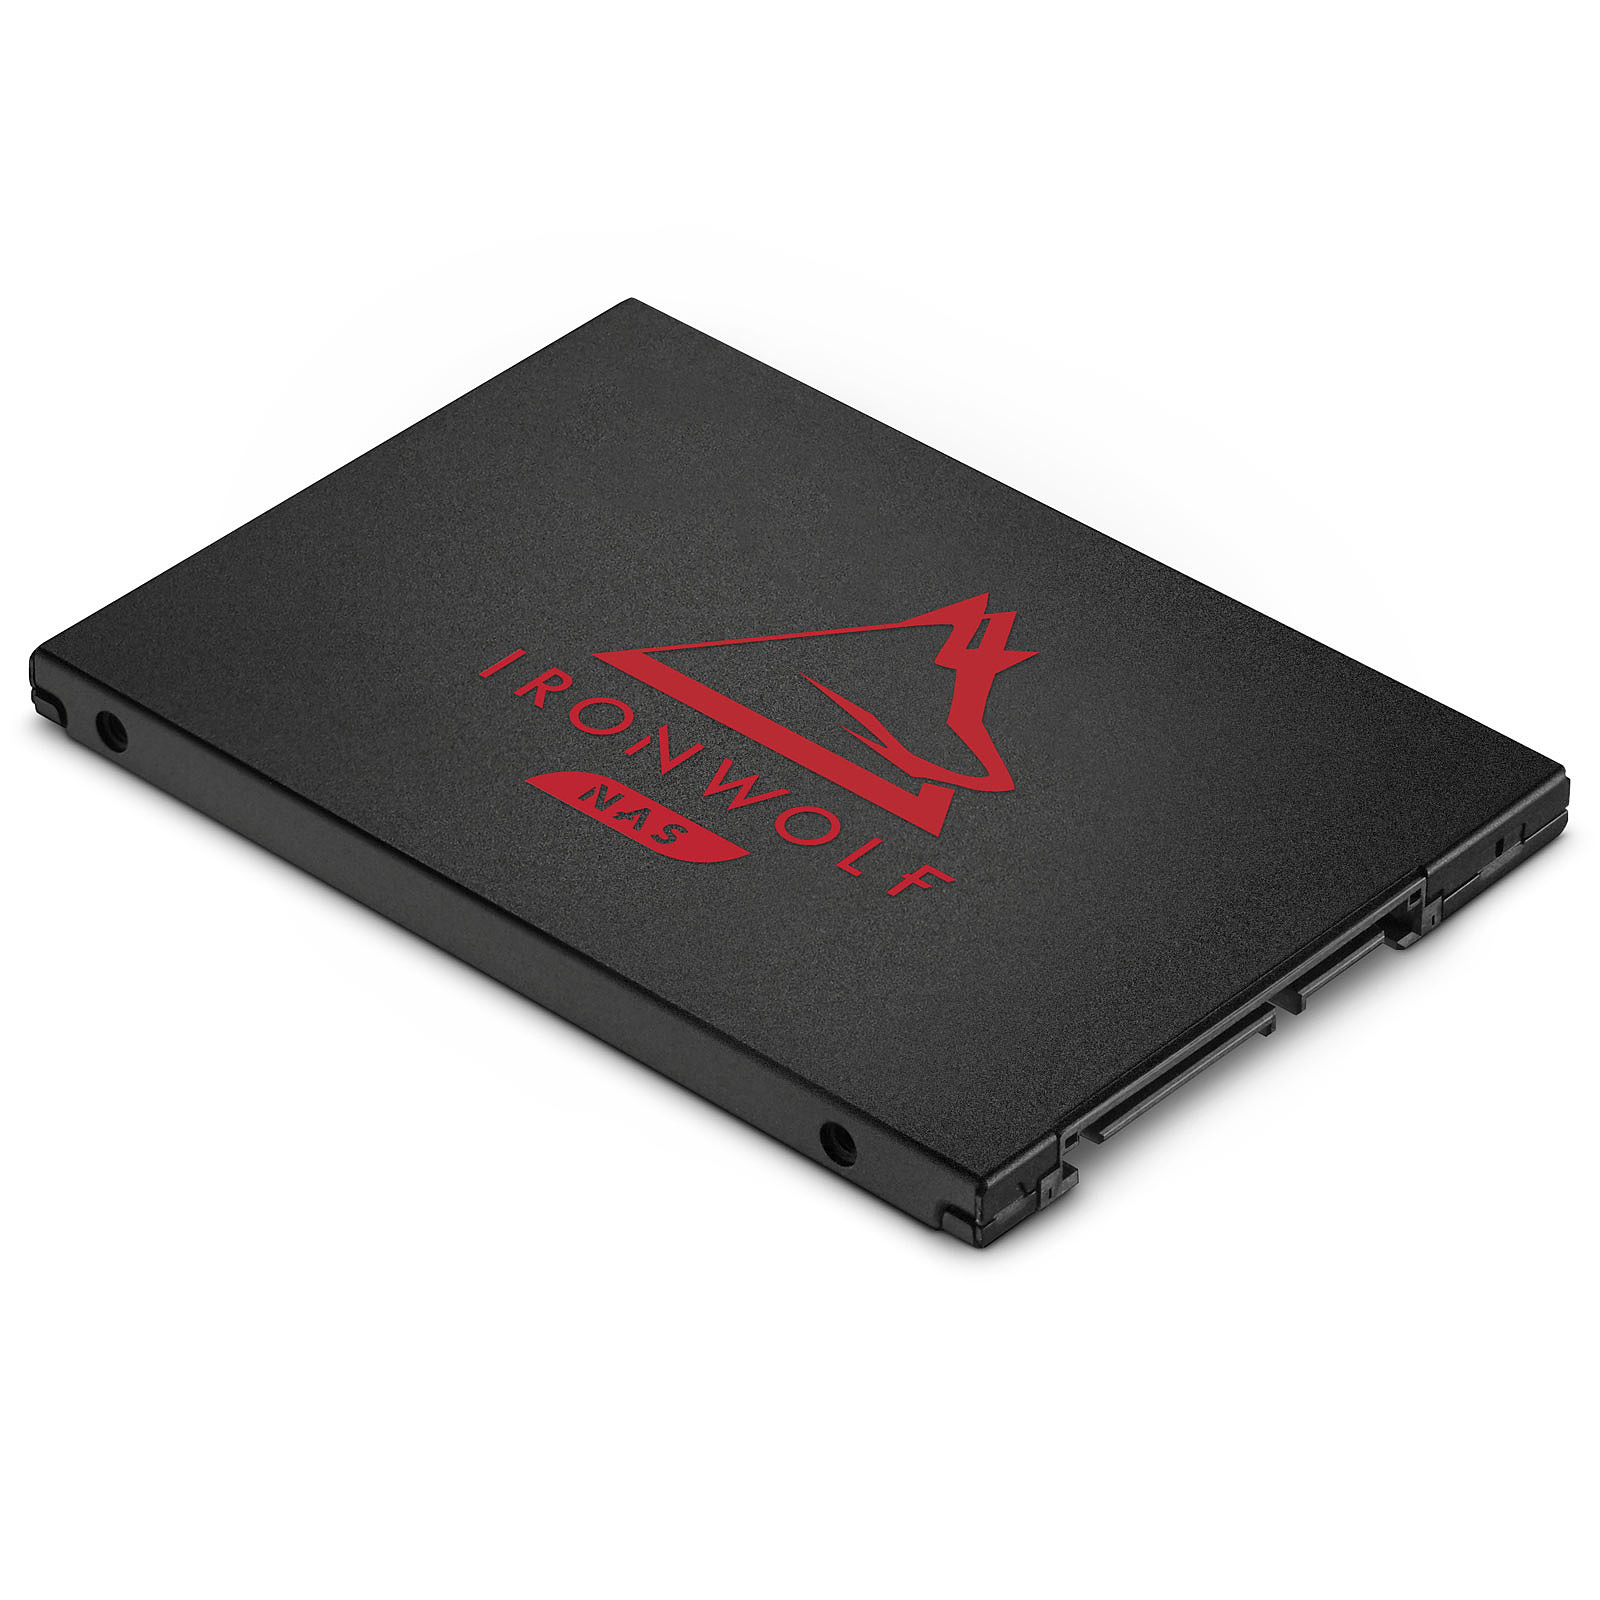 Seagate SSD IronWolf 125 250 Go - Disque SSD Seagate Technology